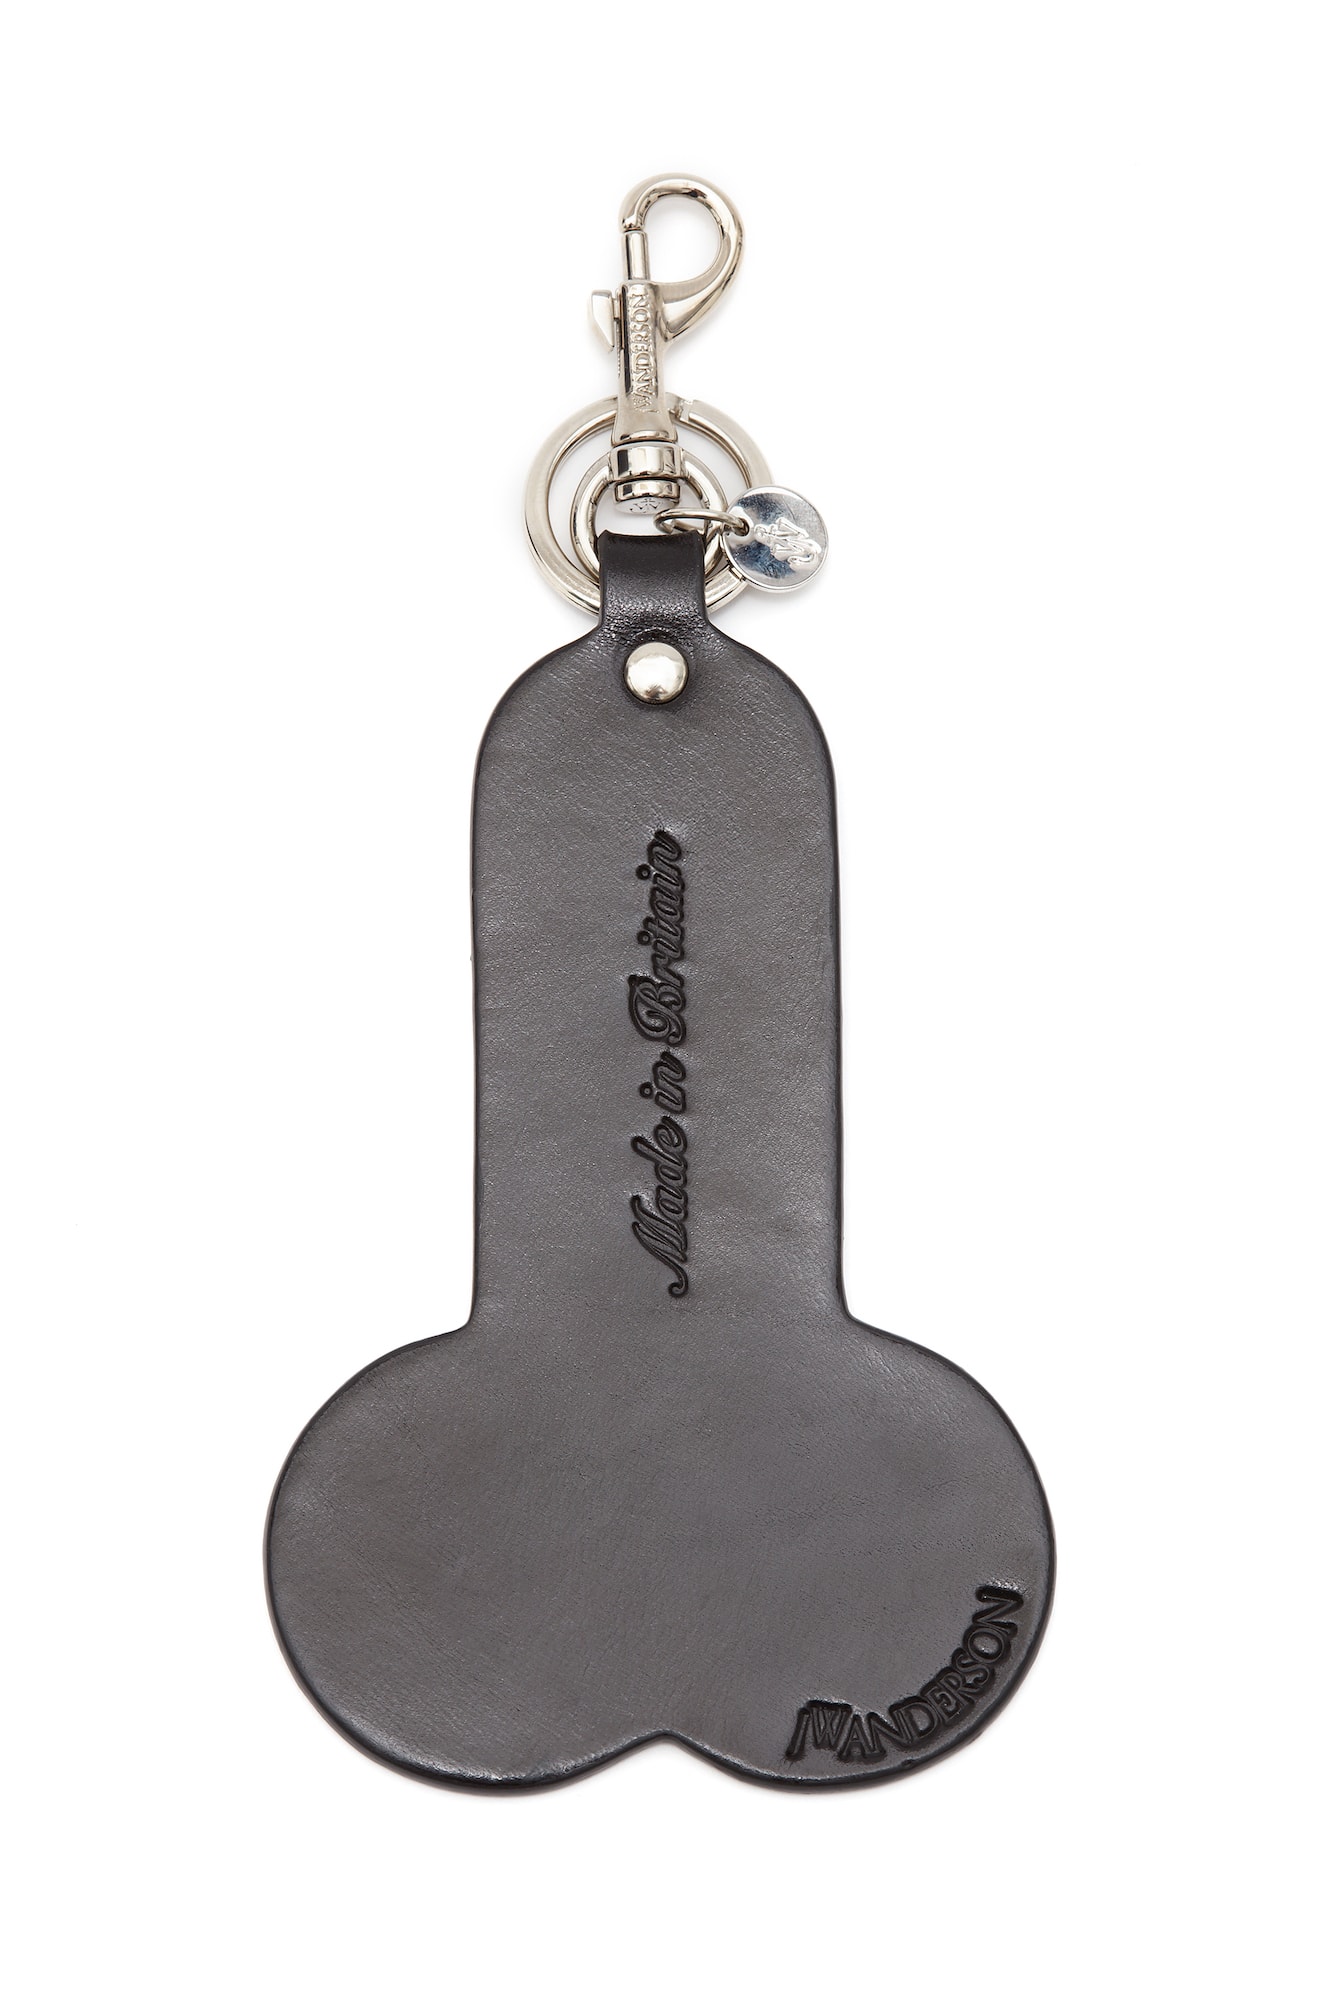 JW Anderson Made in Britain Capsule Collection Release Jonathan Anderson Eco-Conscious Materials London Penis Keychain 